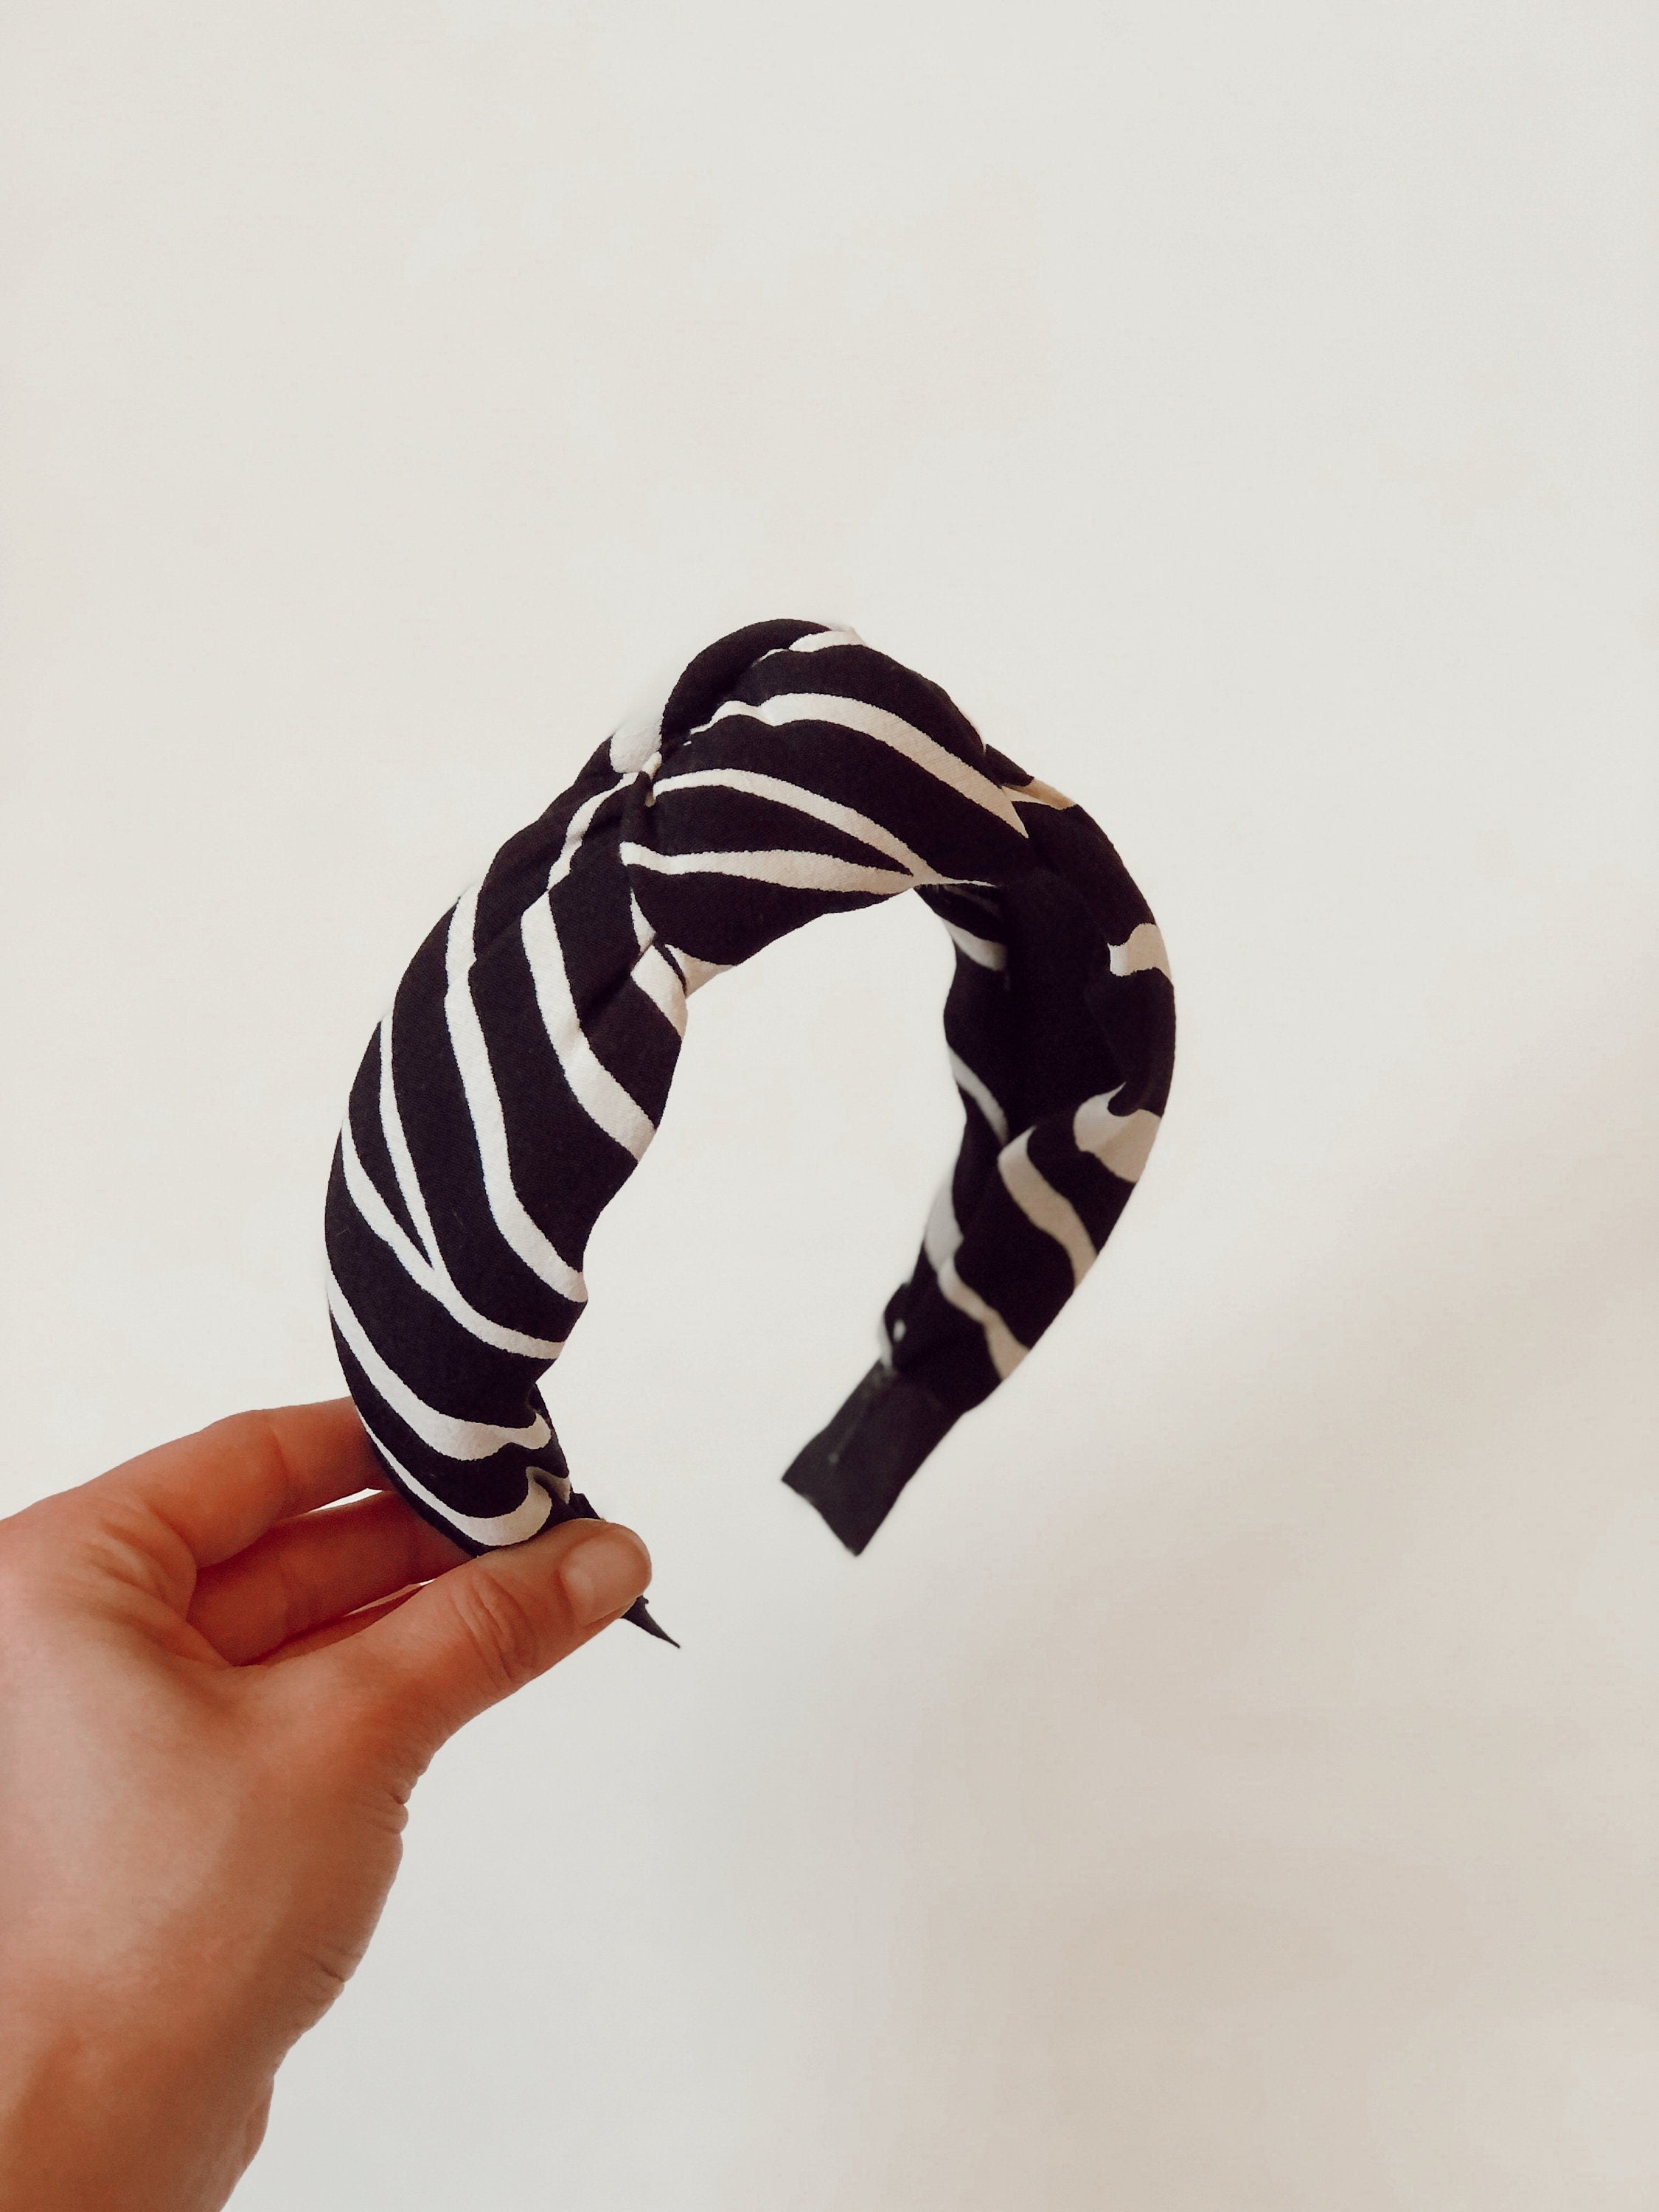 The perfect accessory for any occasion - a versatile knotted headband in a timeless off-white and black colorway.